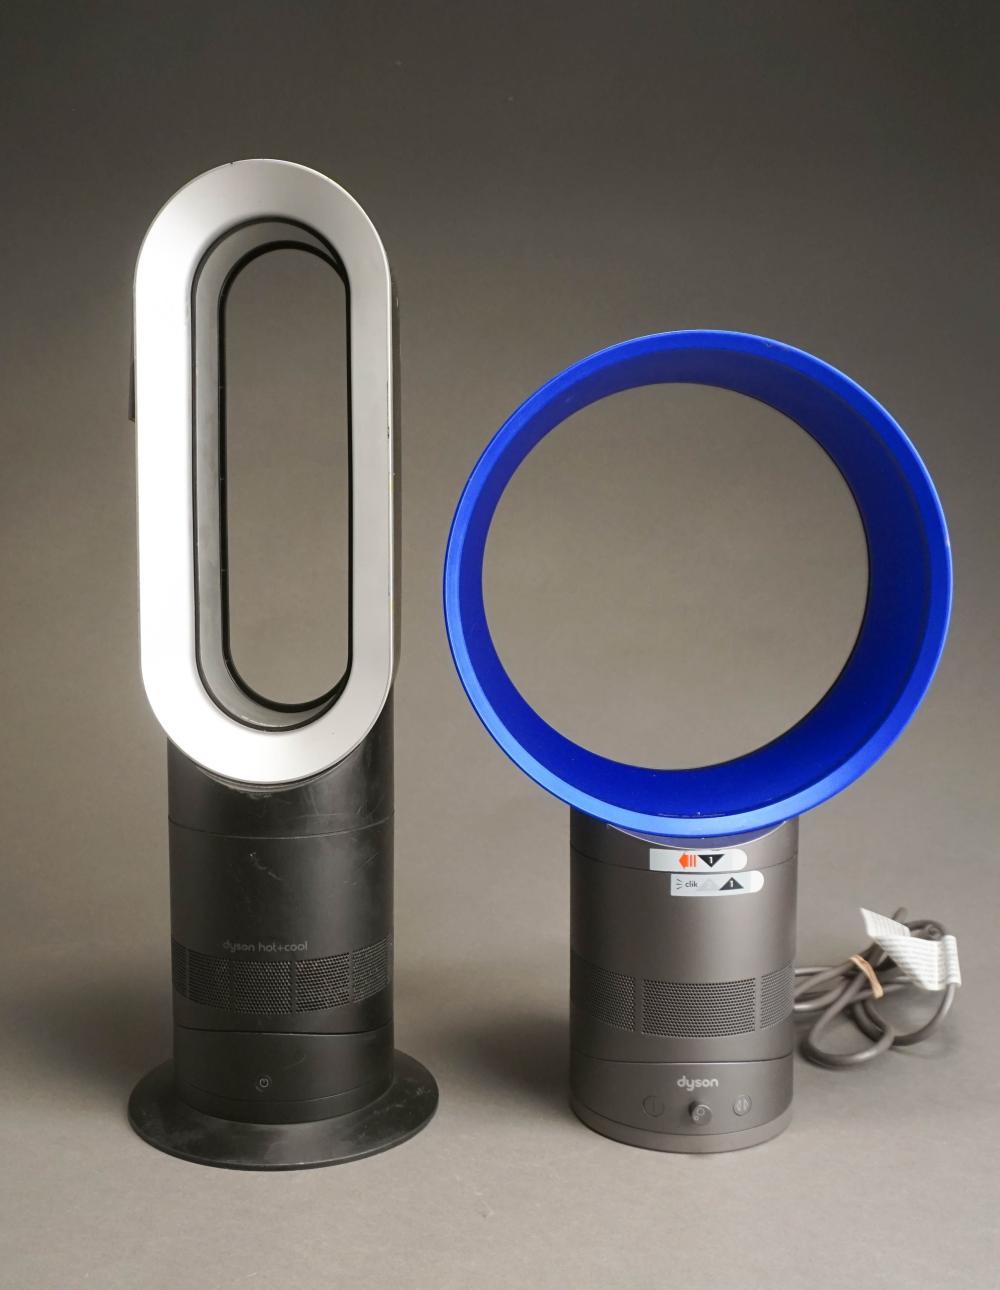 DYSON HOT & COOL FAN AND A DYSON